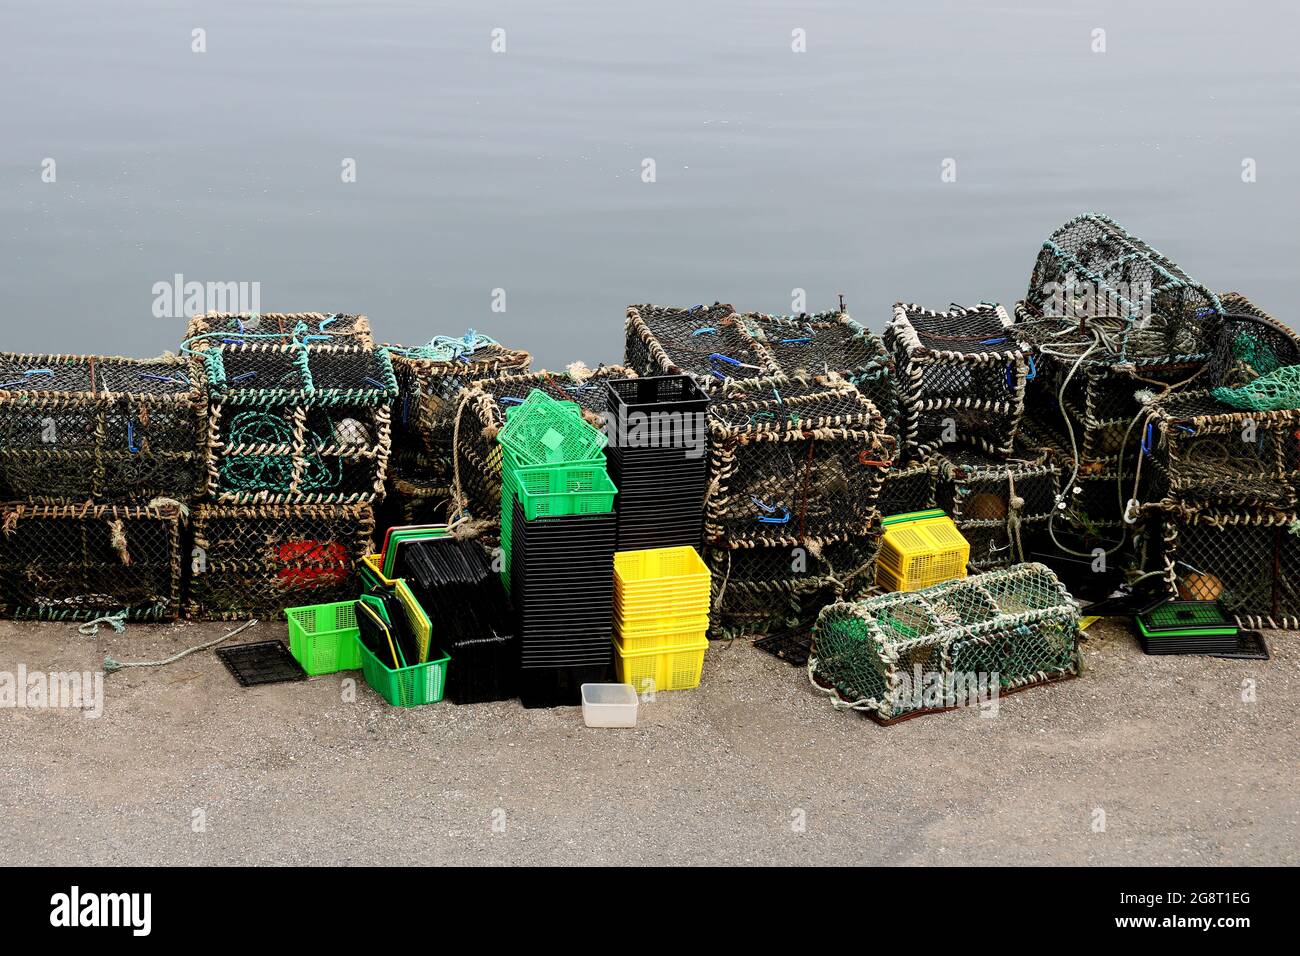 Lobster and crab pots with assorted boxes and tubs at a small coastal harbour Stock Photo